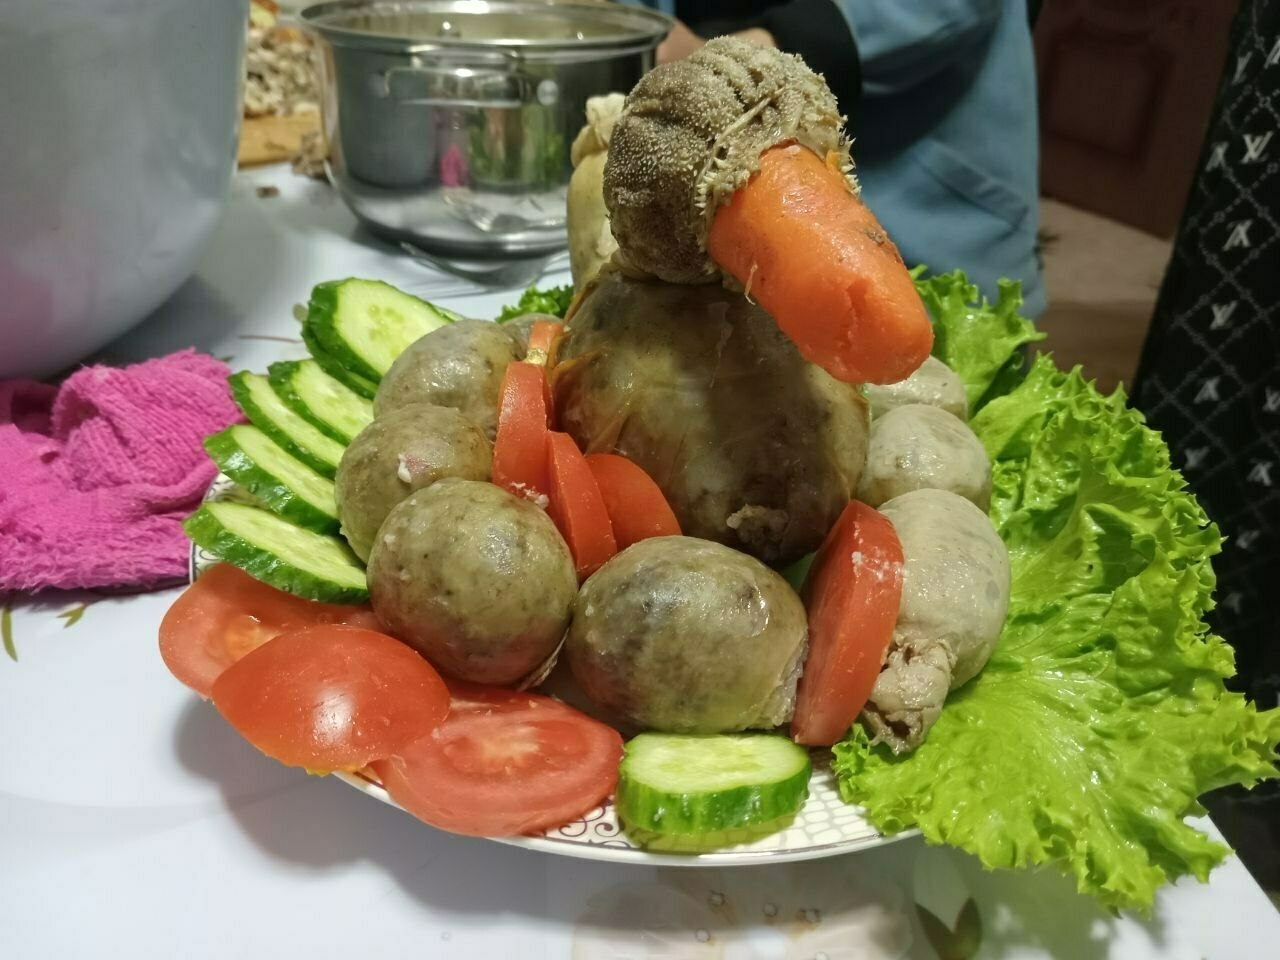 sliced cucumbers and tomatoes around two stacked 'balls' of sausage, with a carrot protruding from the top ball so that the whole thing looks like a duck